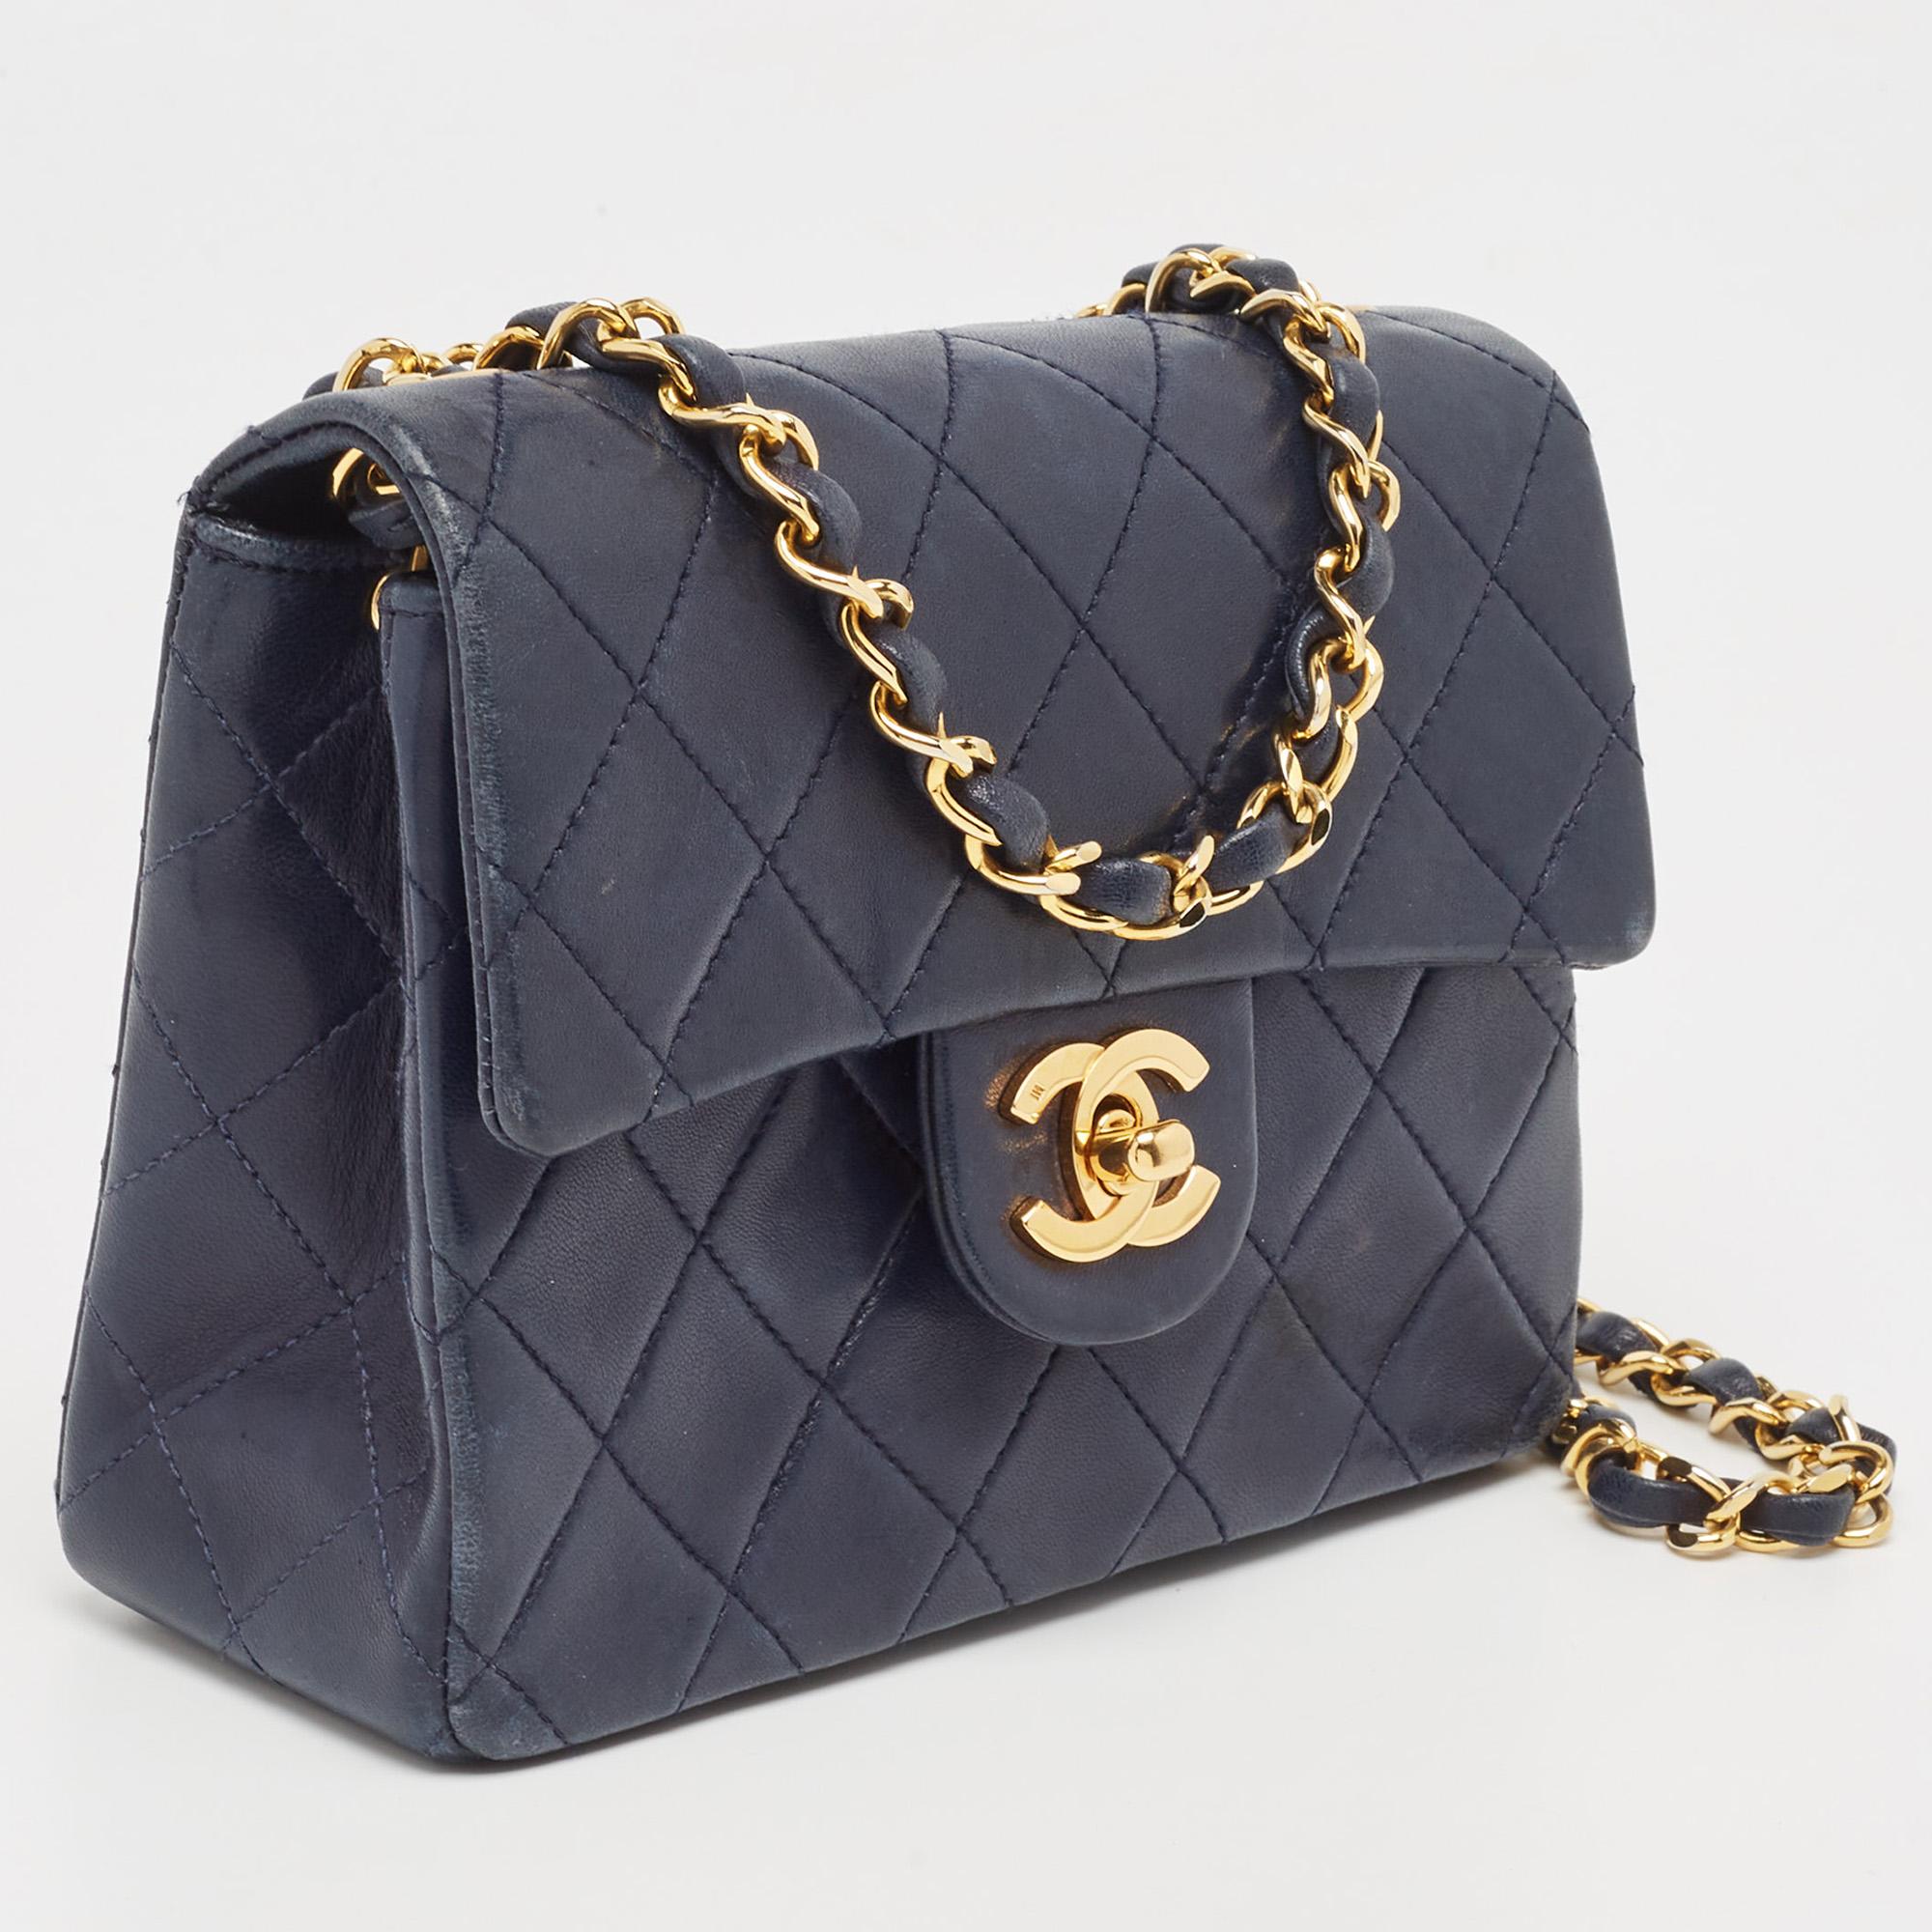 Chanel Navy Blue Quilted Leather Mini Vintage Square Flap Bag For Sale 7